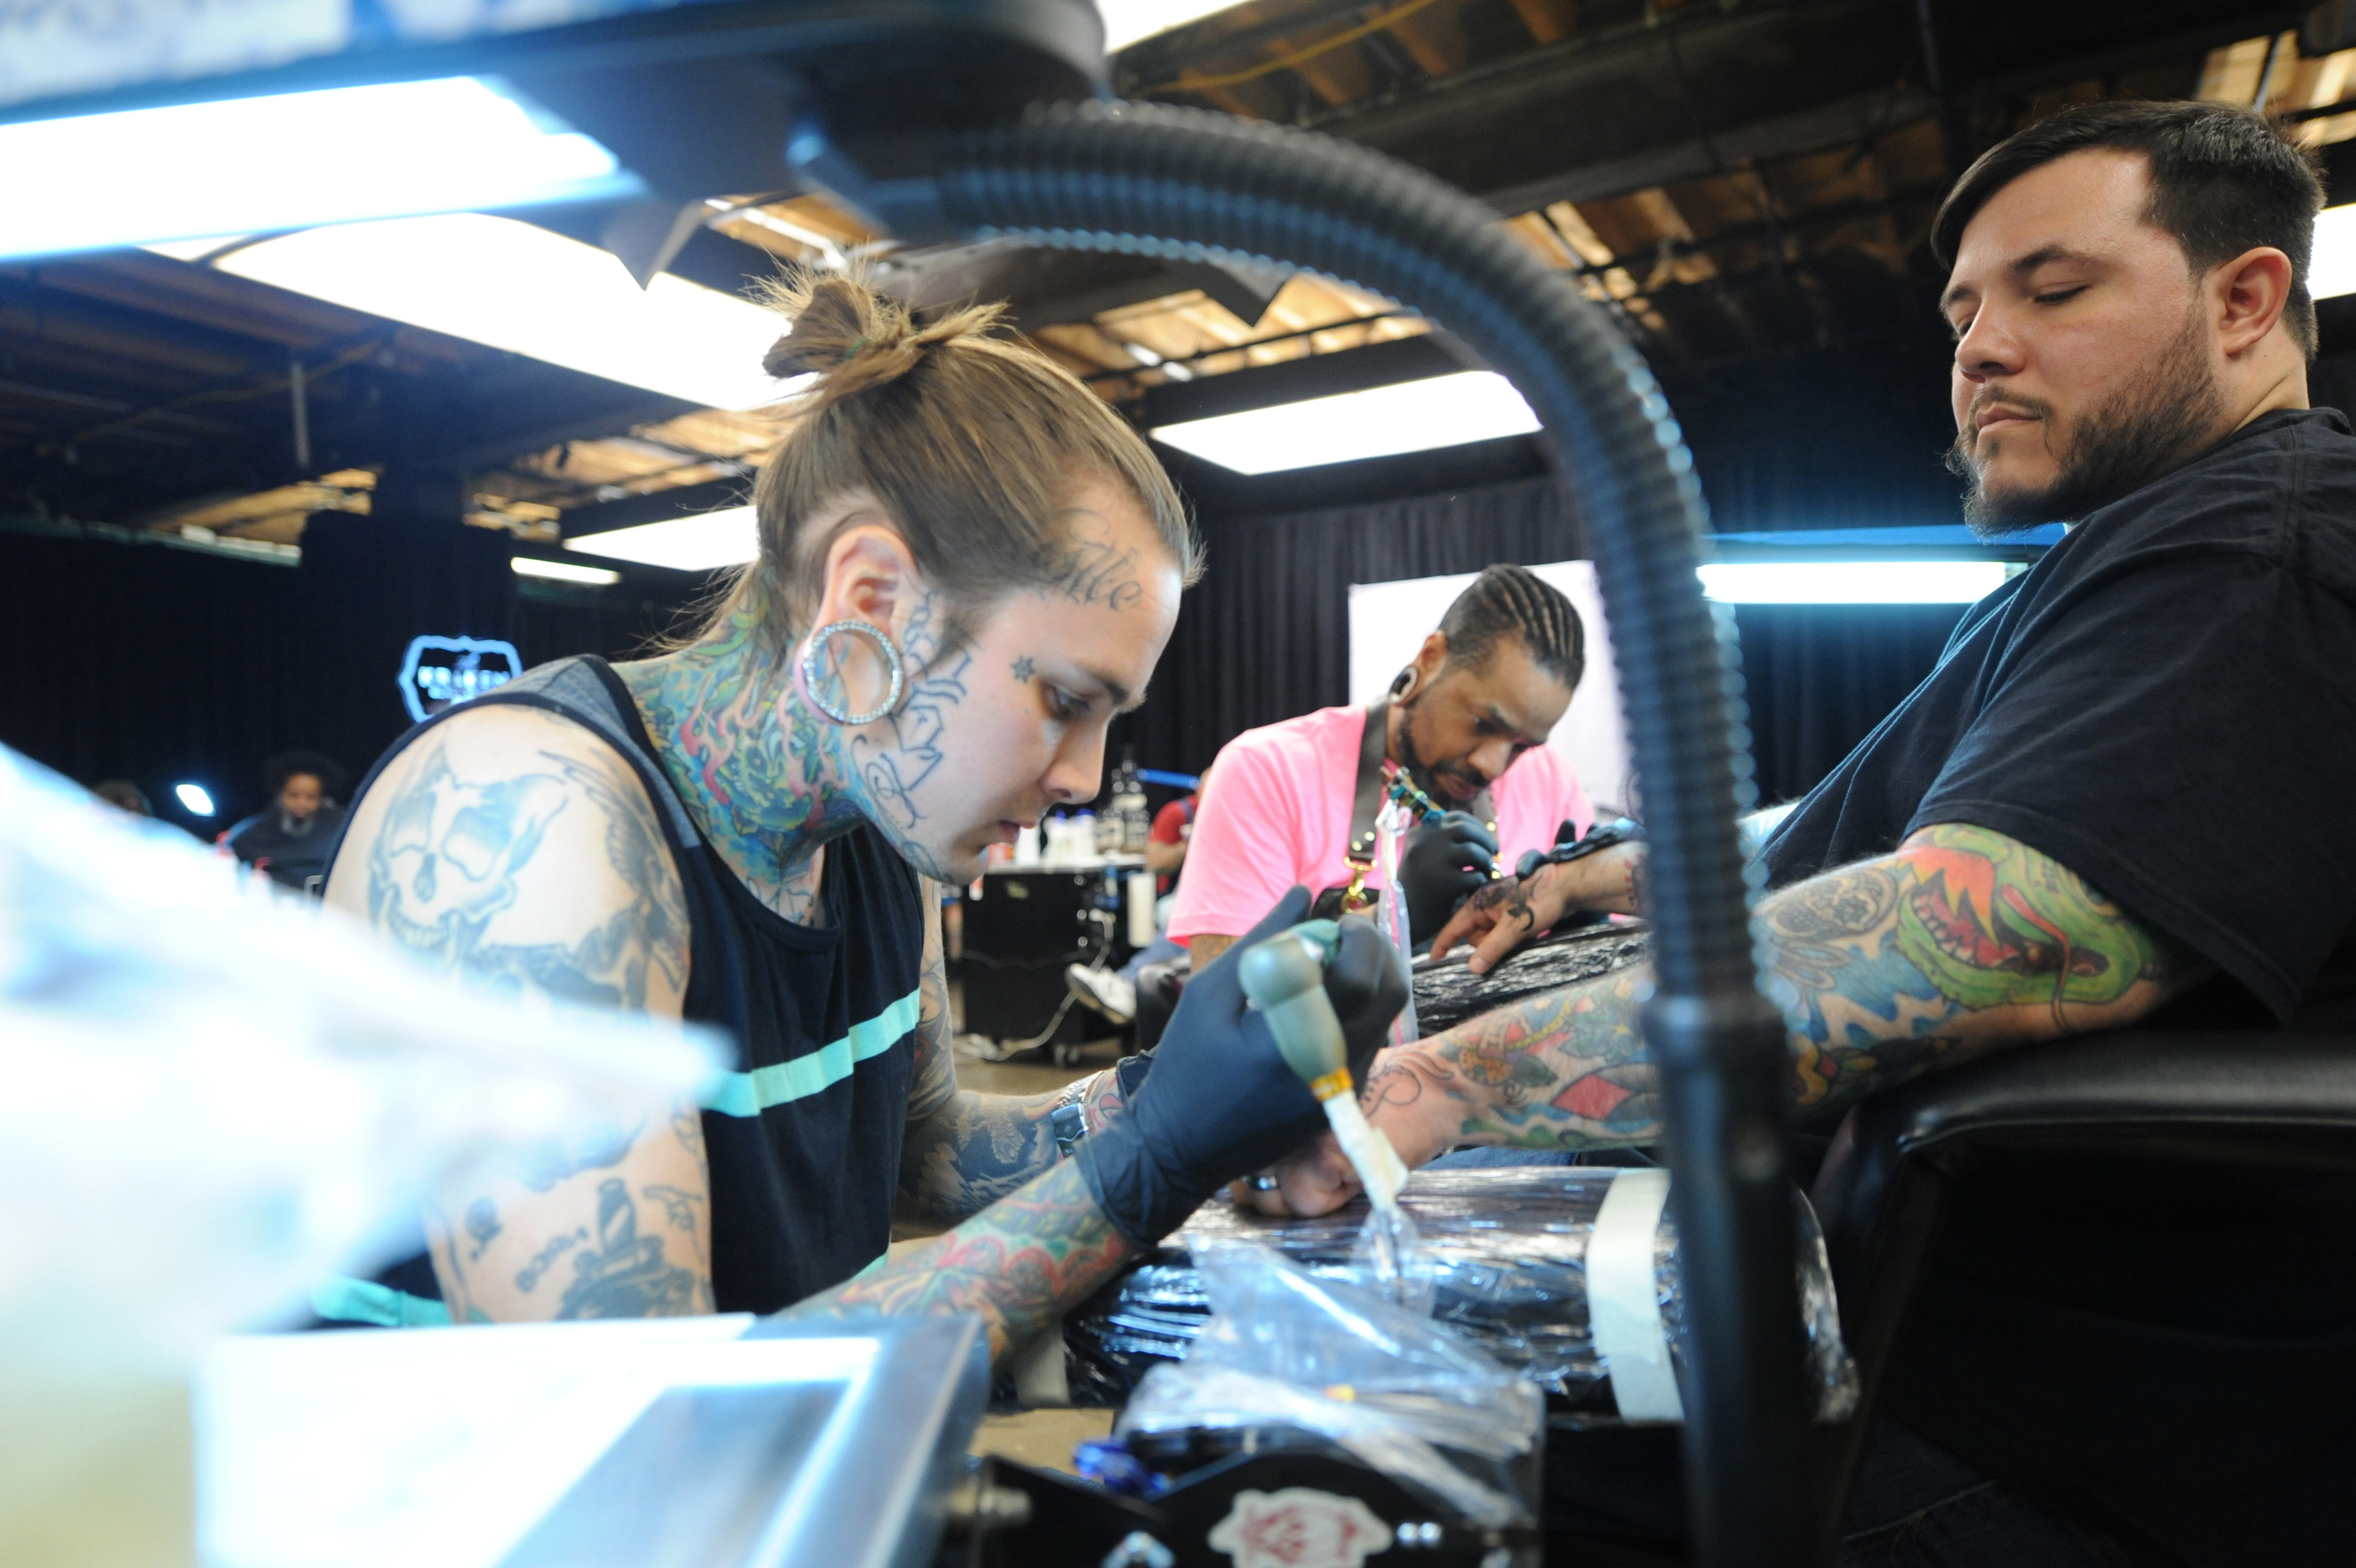 Three tattoo artists concentrating on inking clients at a tattoo convention